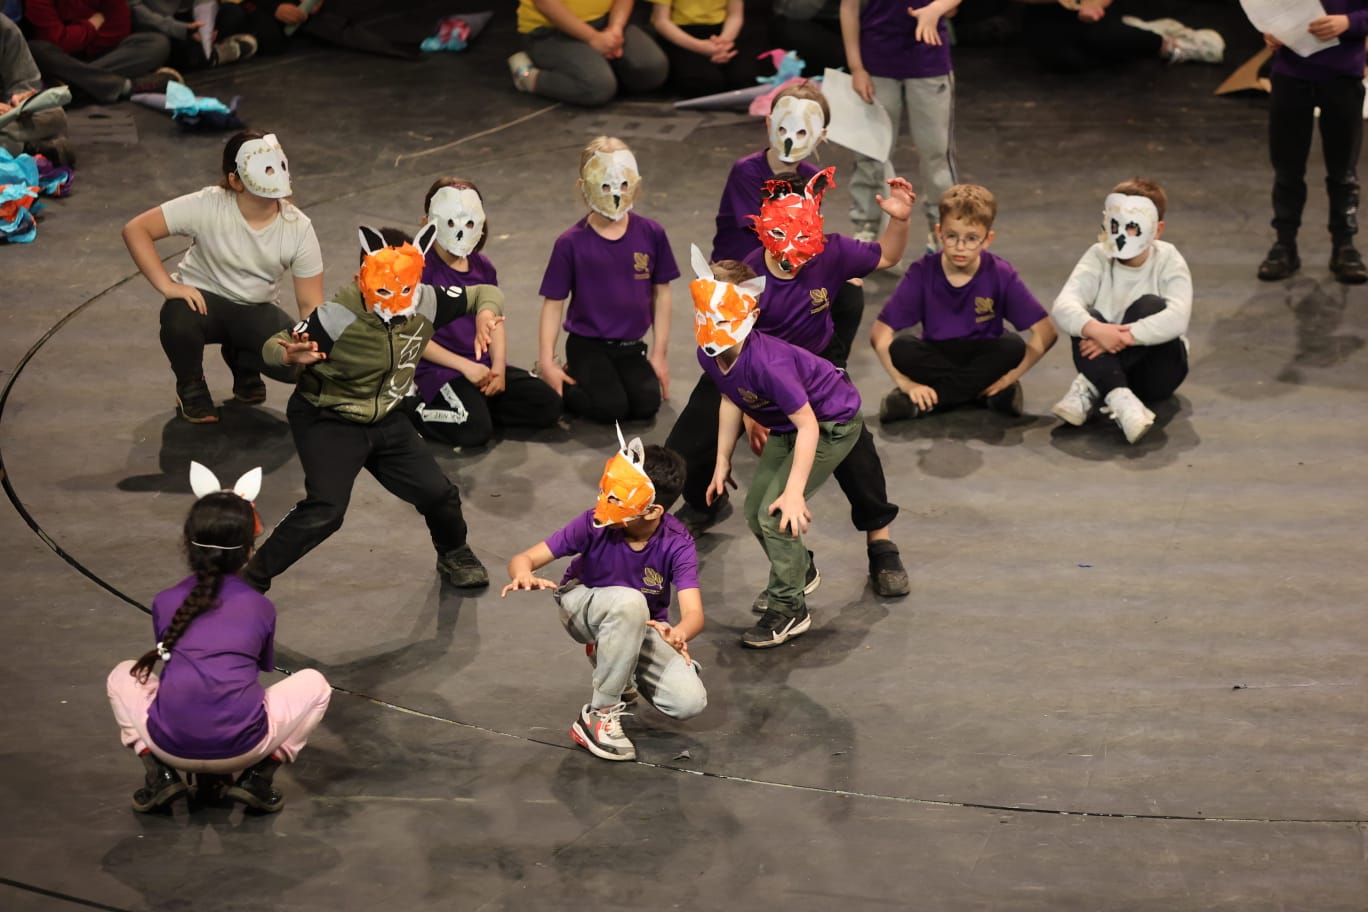 Children performing play in animal masks